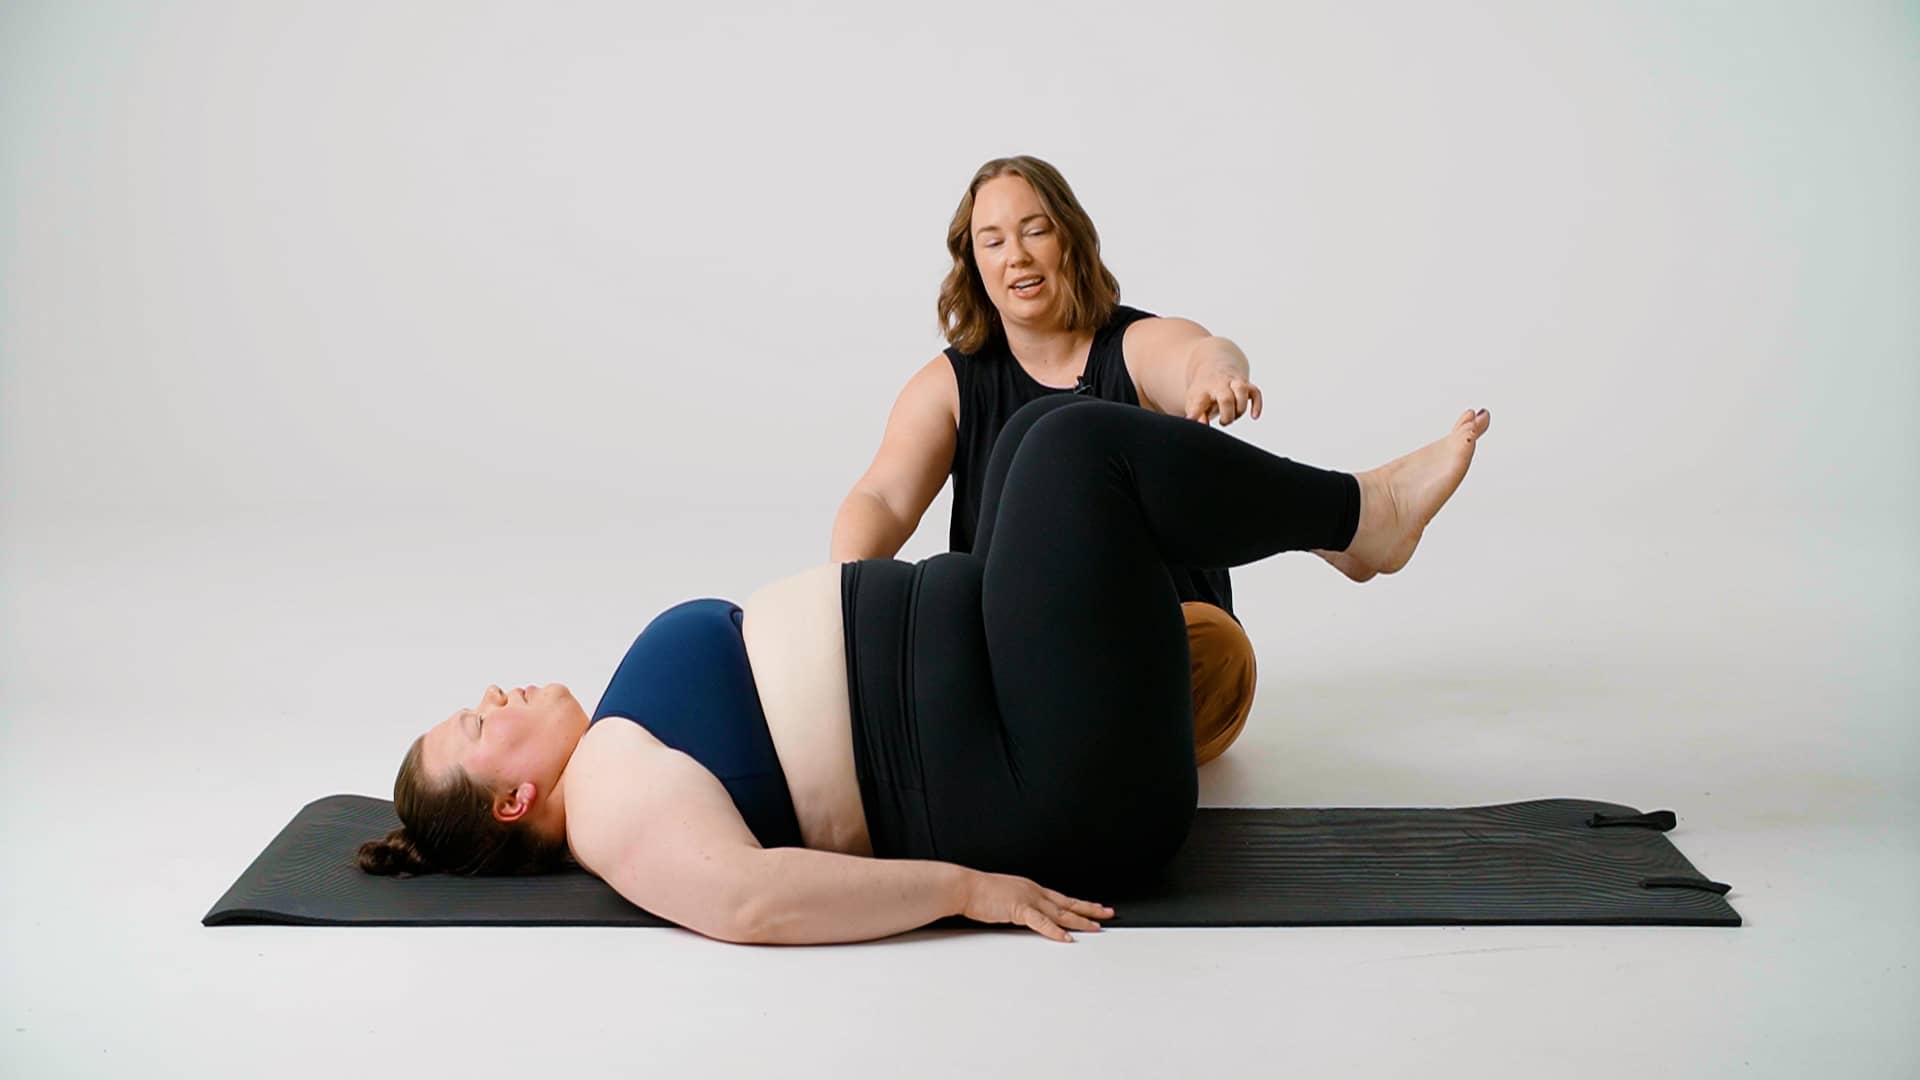 Jessie is seated on the ground, performing a diastasis recti assessment, to check the healing on a woman who is laying on her back with her legs in "tabletop" position.